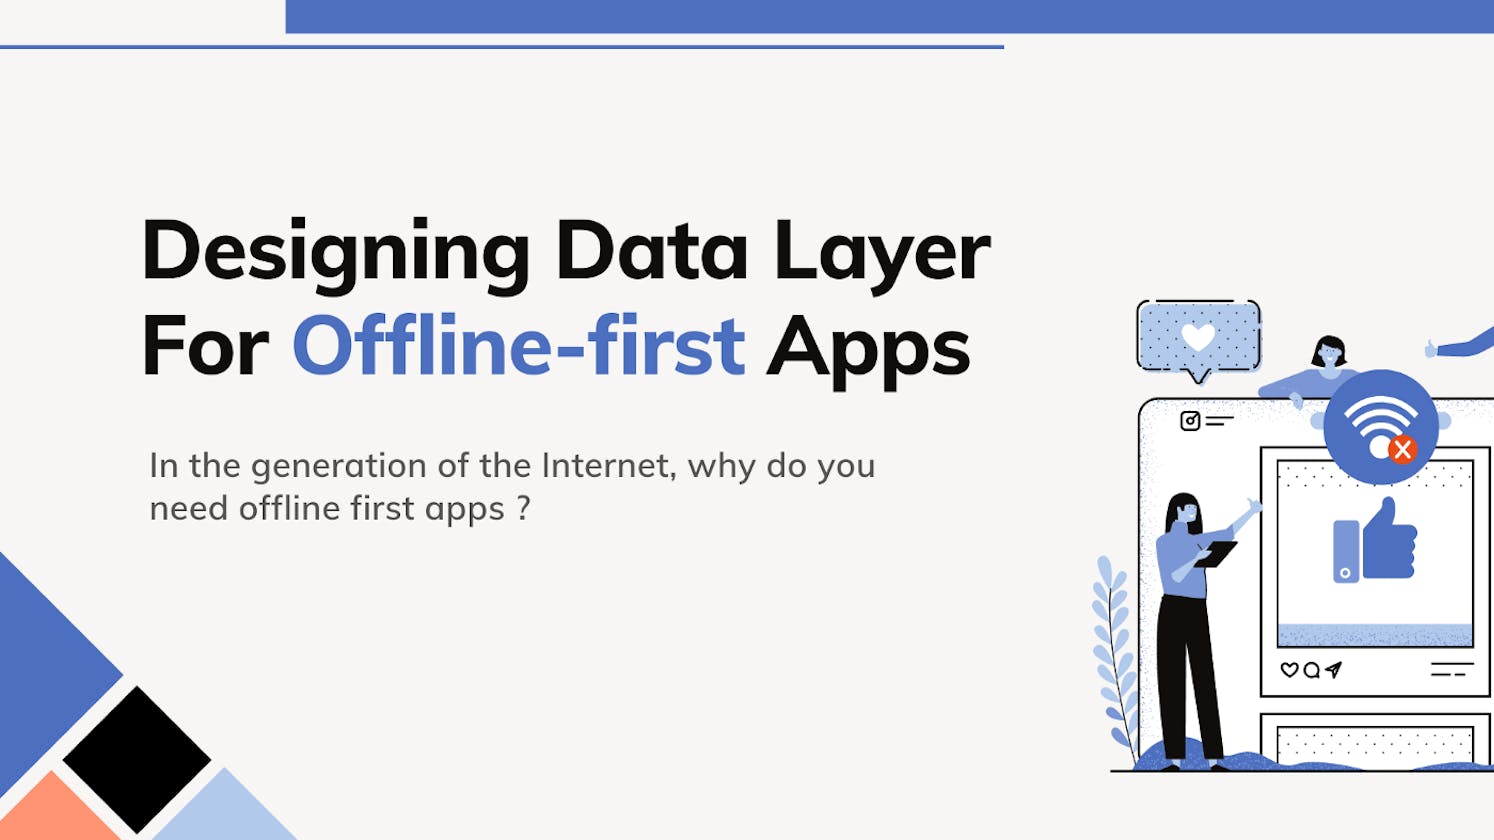 iOS — Designing Data Layer For Offline-first Apps